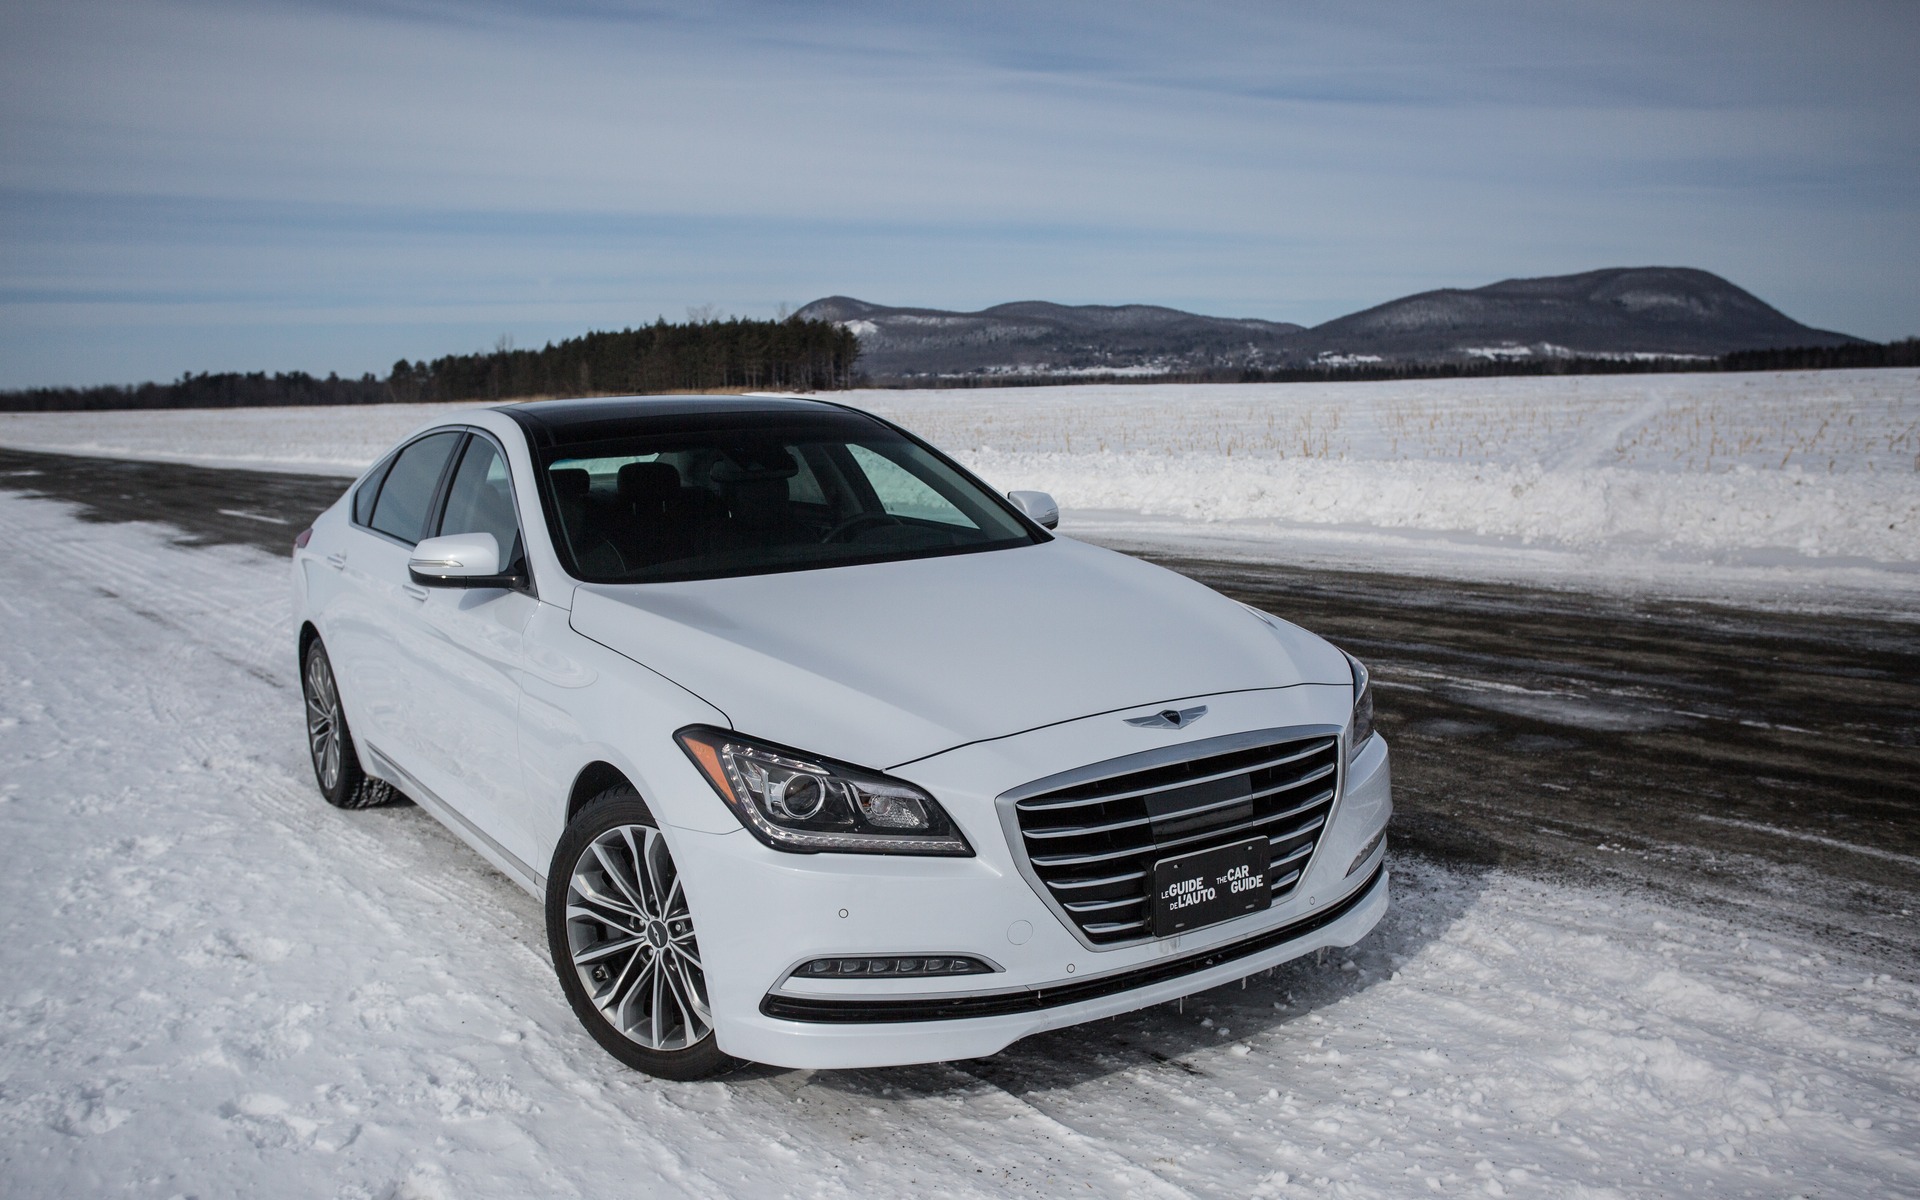 2016 Hyundai Genesis - News, reviews, picture galleries and videos - The  Car Guide